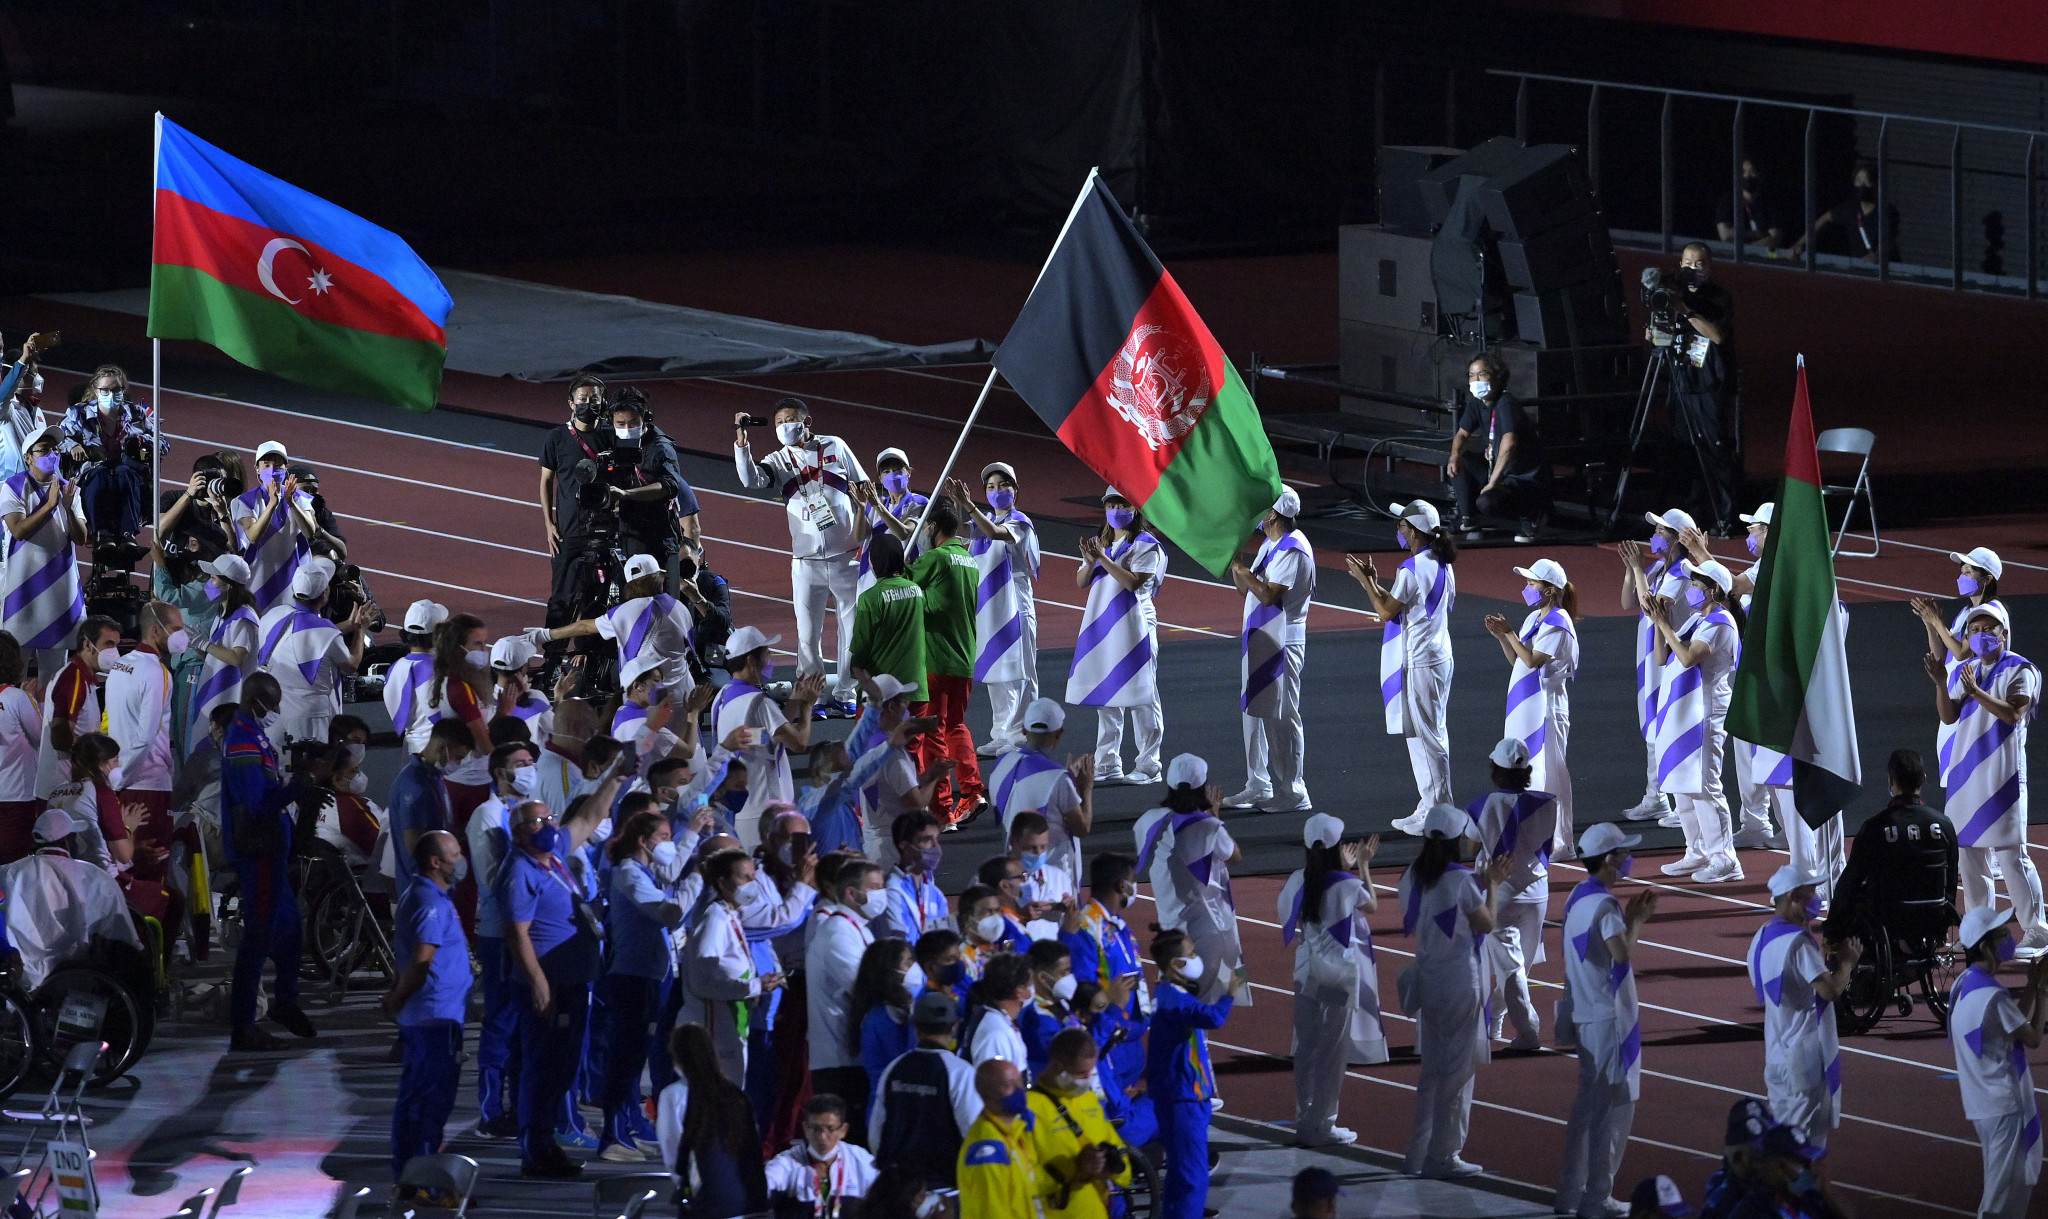 Hossain Rasouli and Zakia Khudadadi carried Afghanistan's flag during the Athletes Parade ©Getty Images